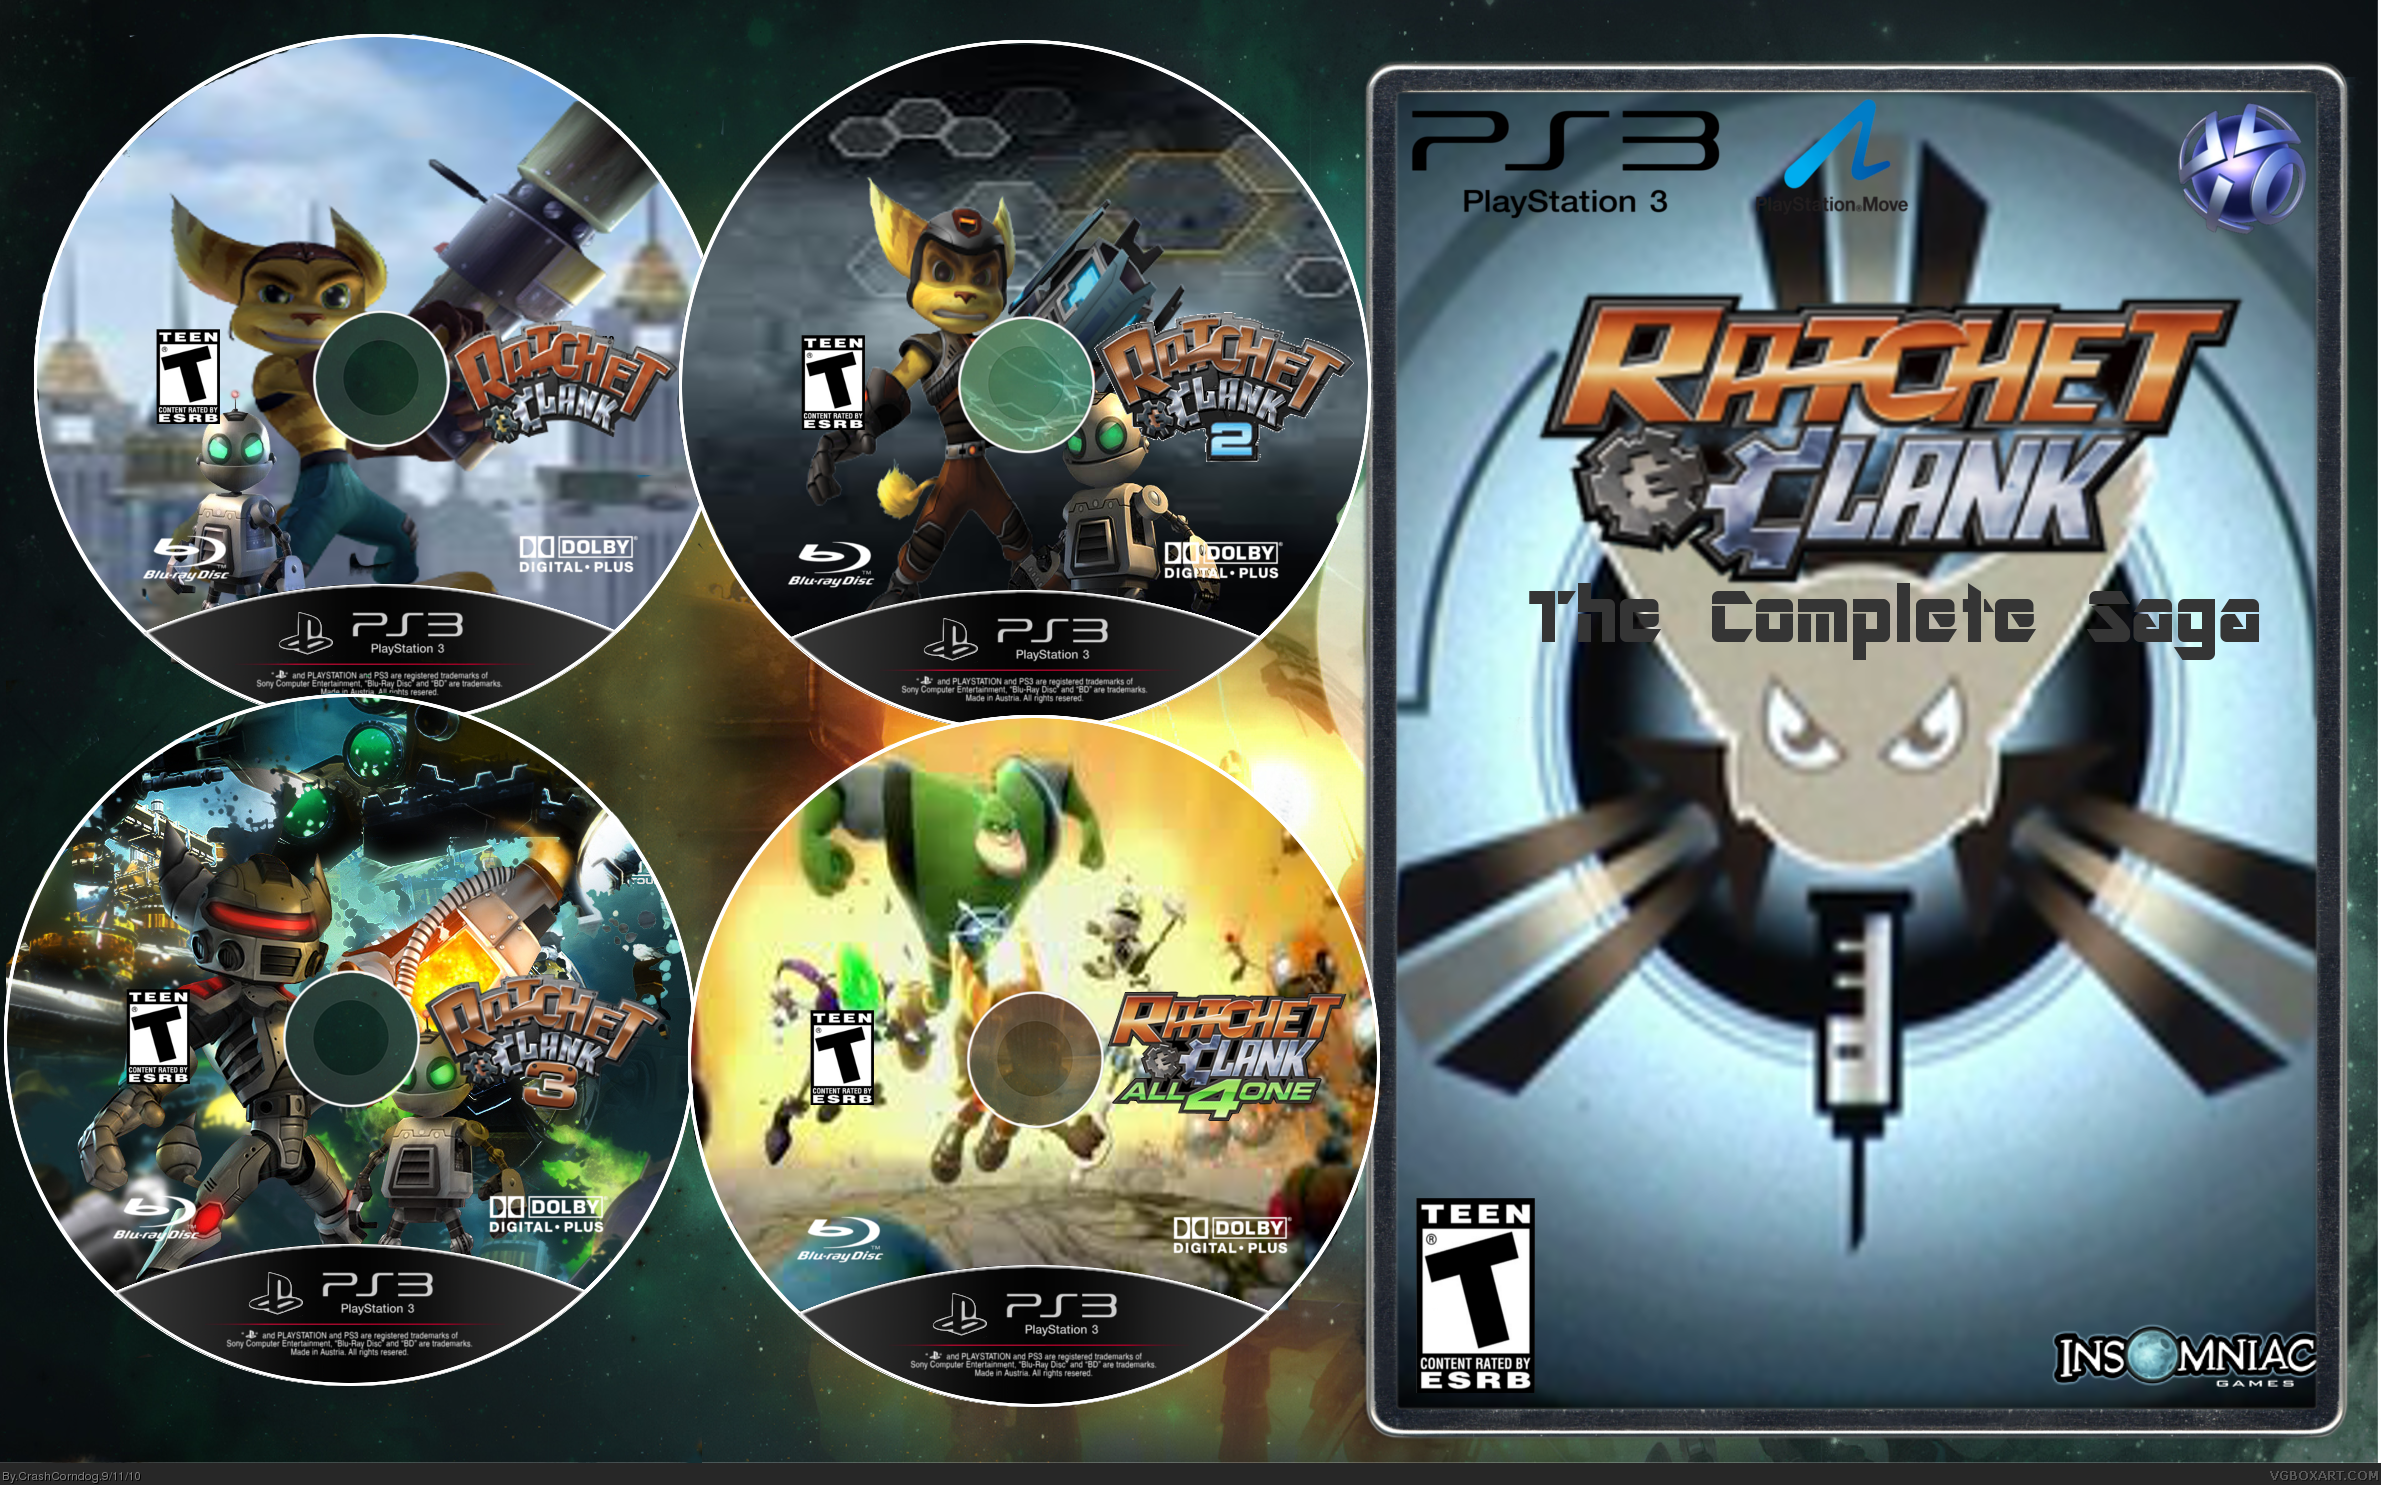 Ratchet & Clank: The Complete Saga box cover